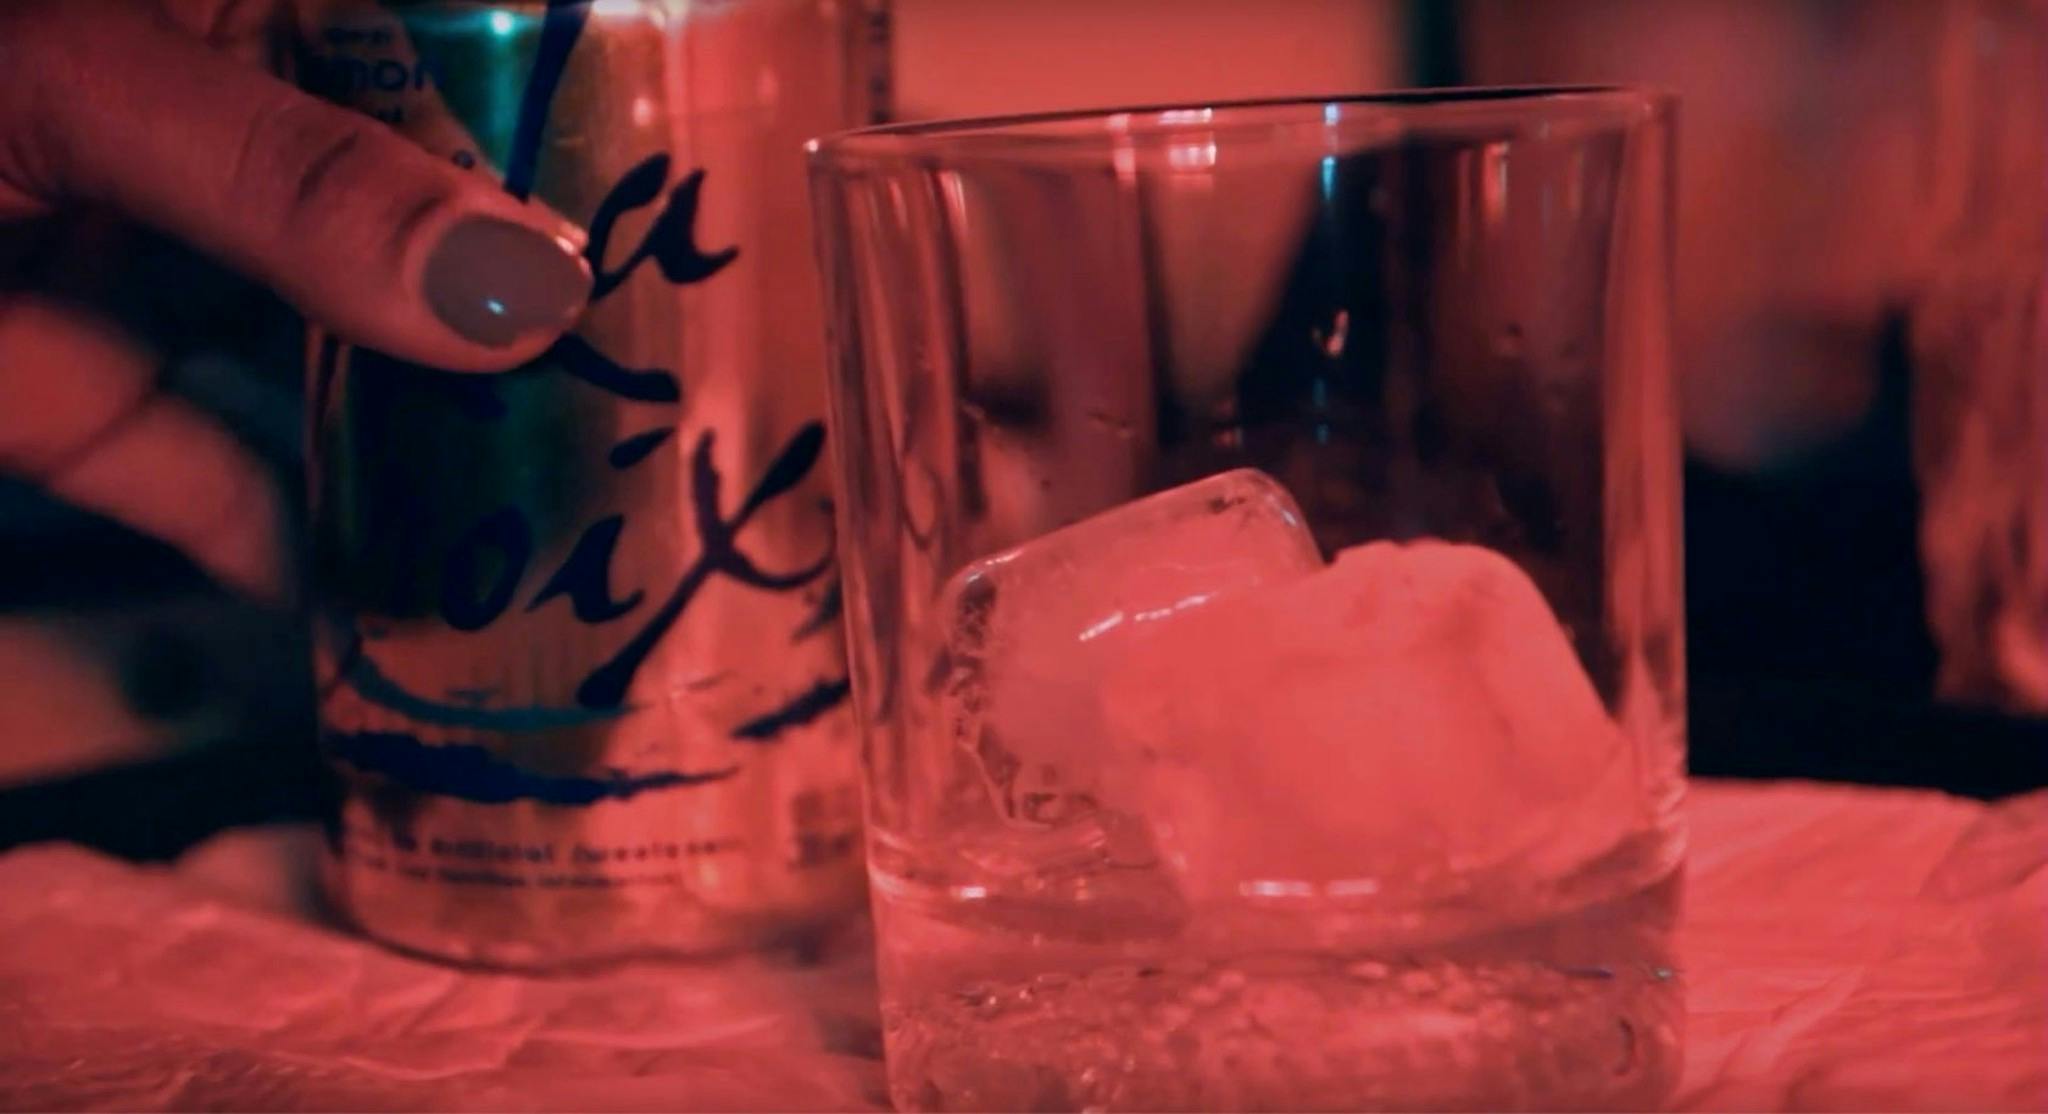 La Croix porn has been willed into existence by America’s horniness for seltzer